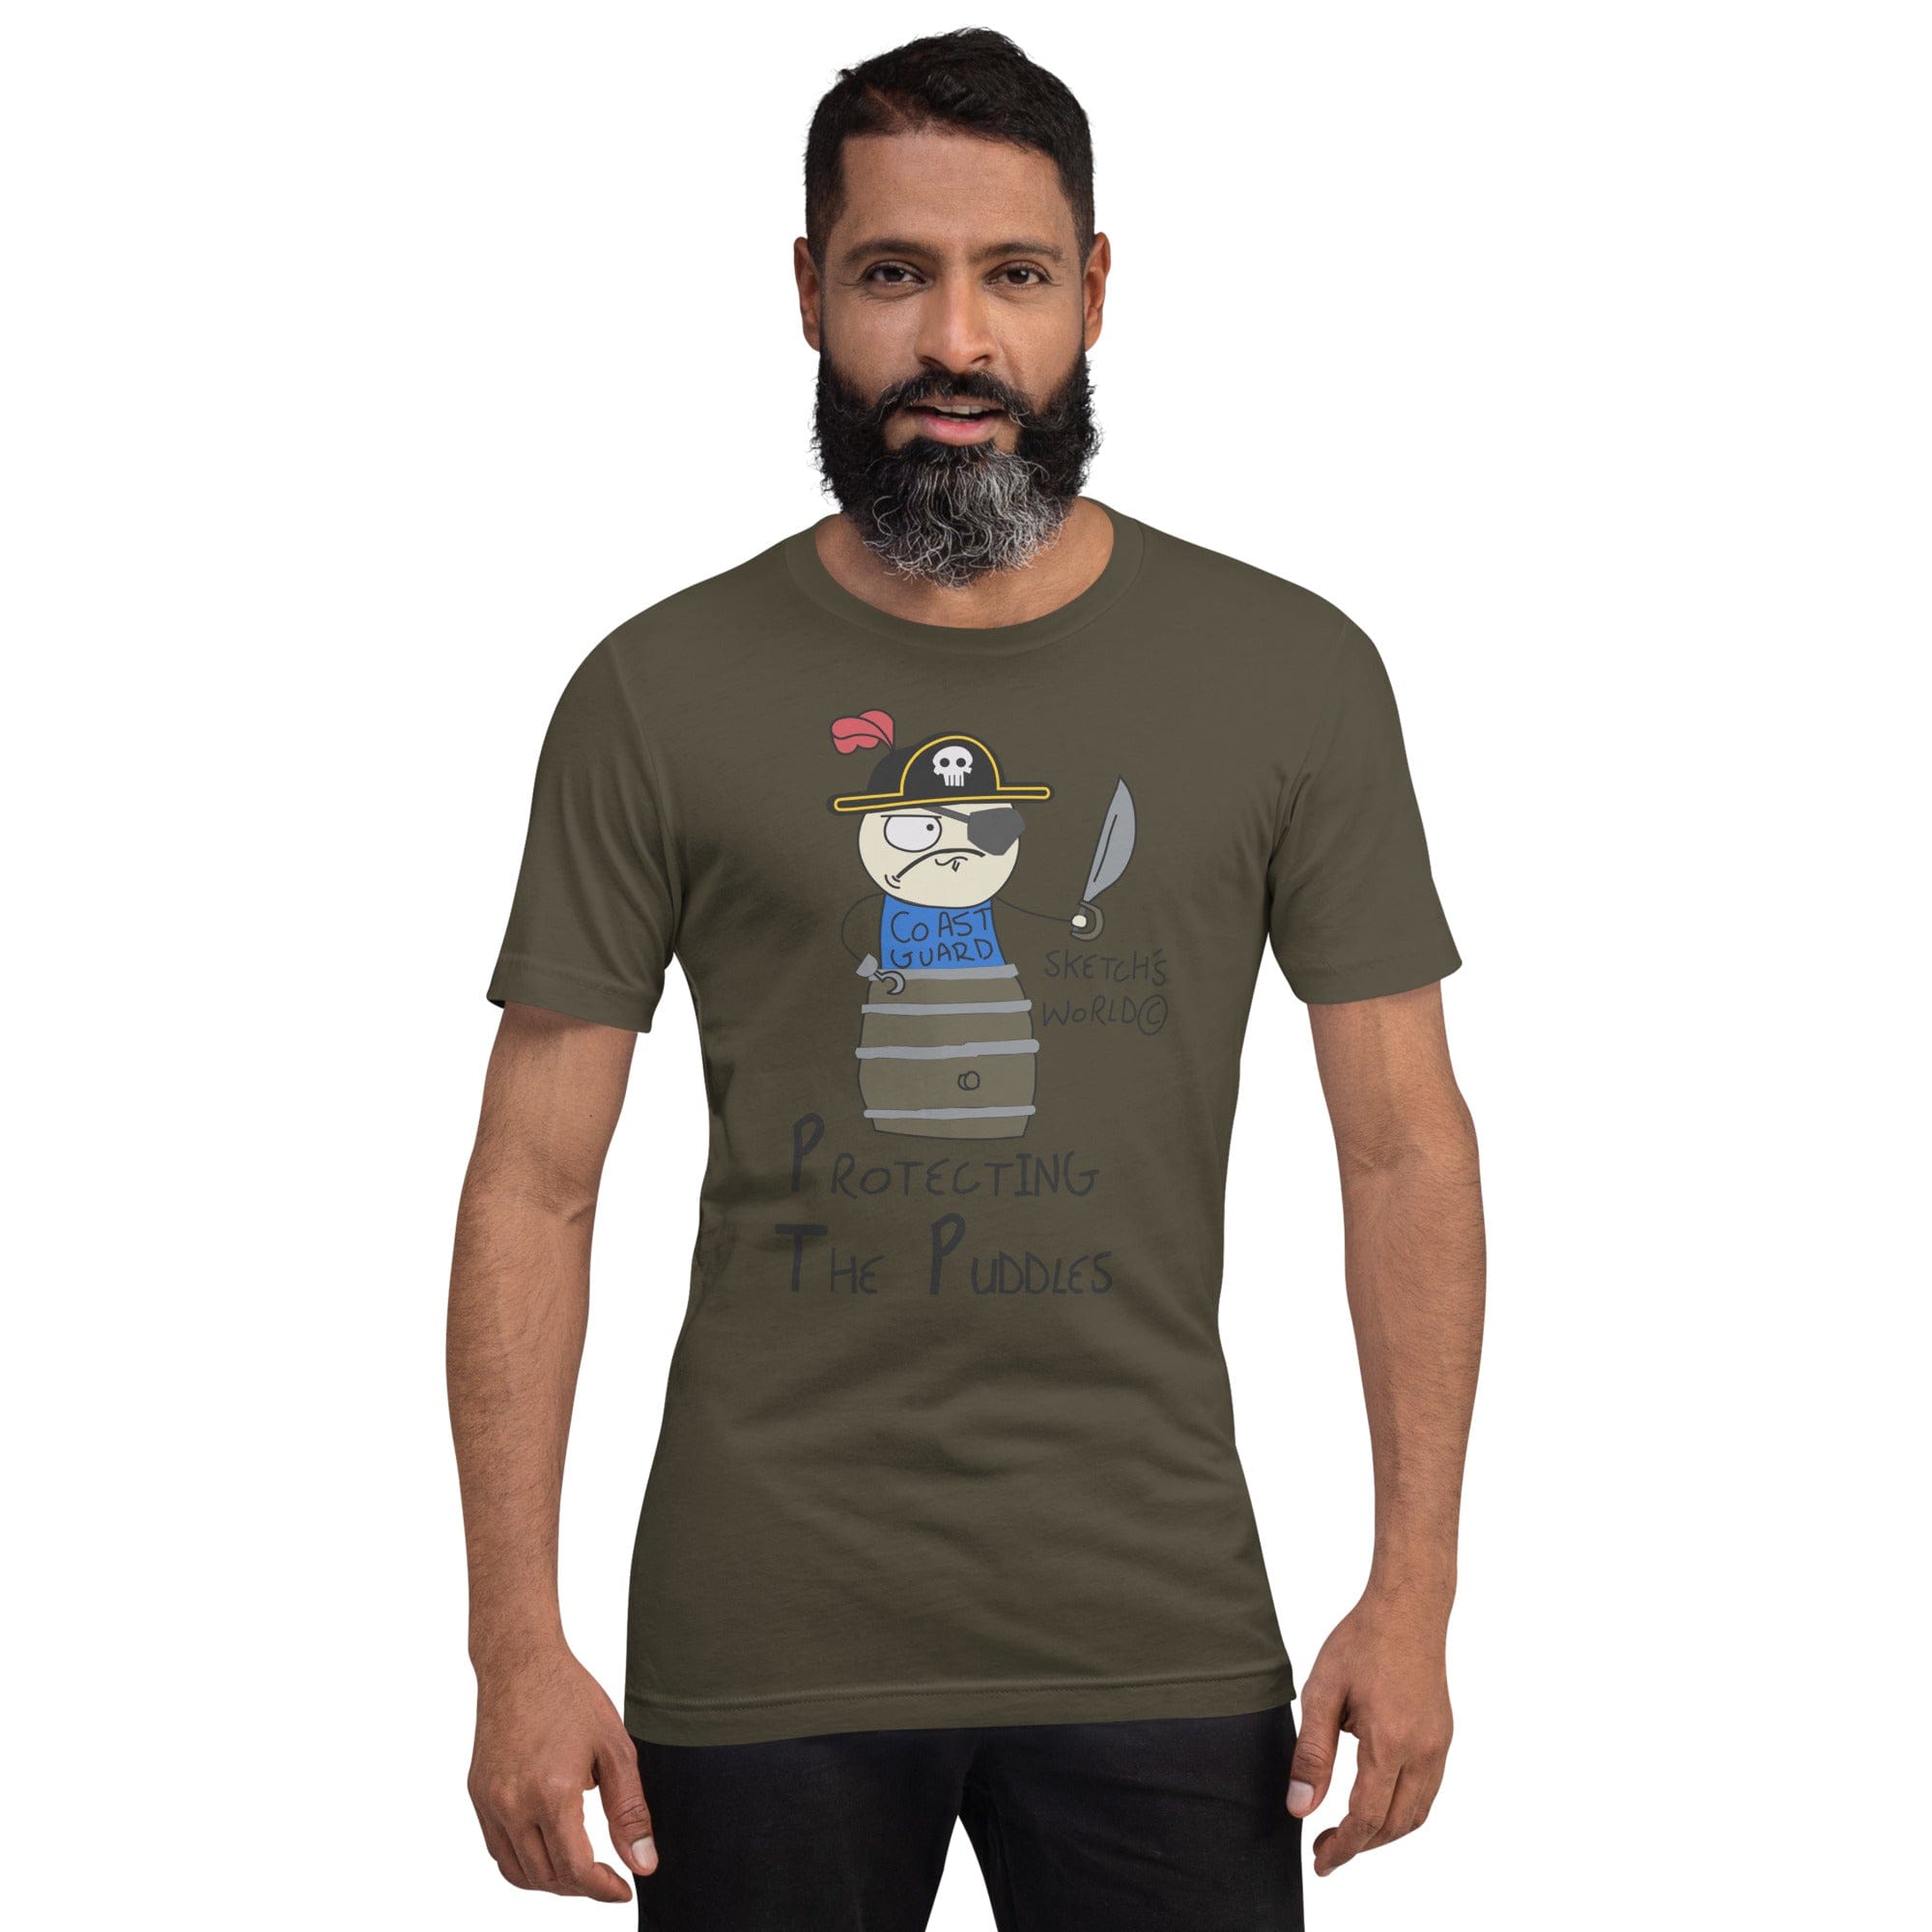 Tactical Gear Junkie Army / S Sketch's World © Officially Licensed - Protecting the Puddles Coast Guard Unisex T-Shirt